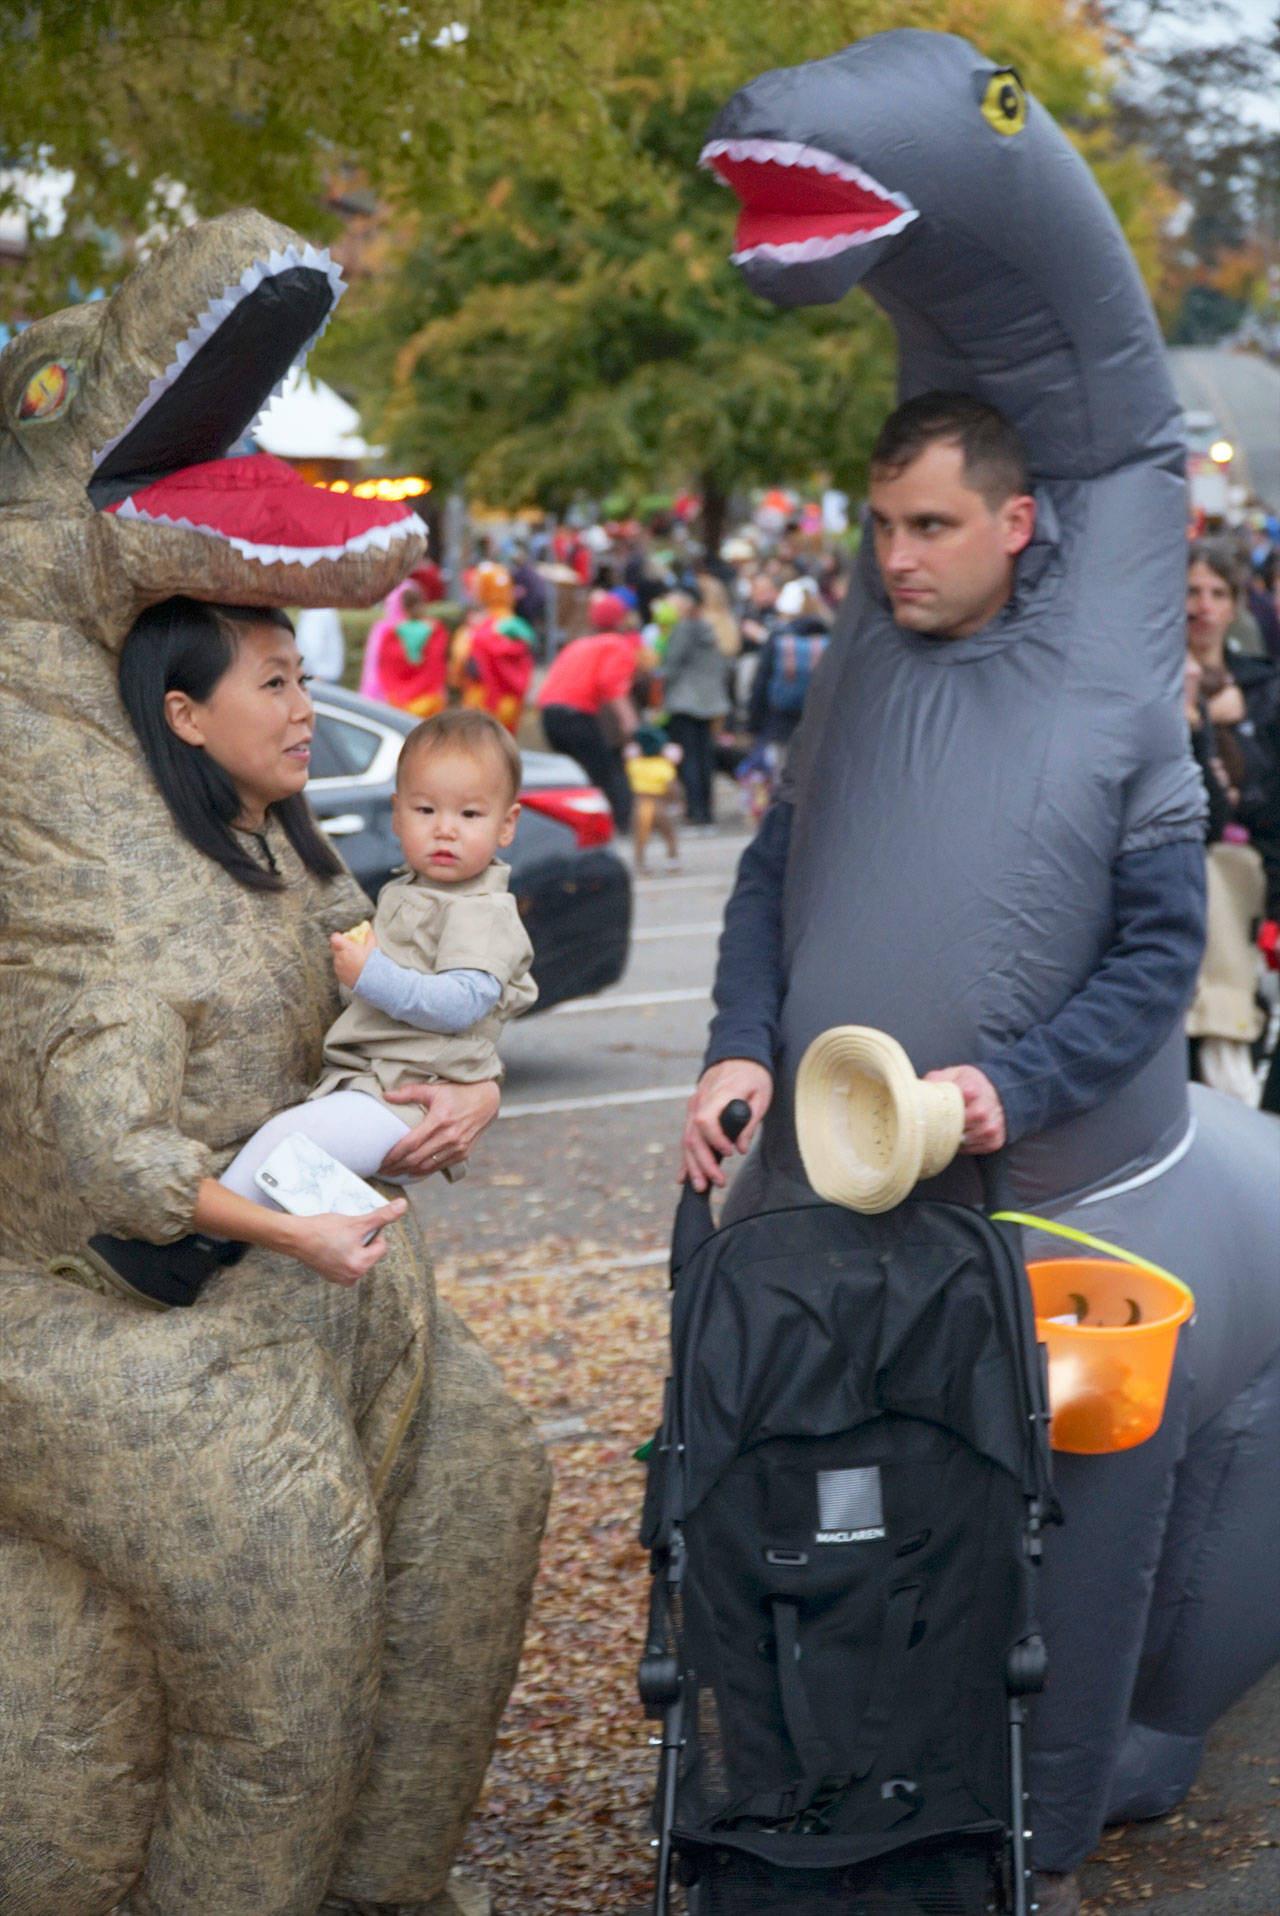 Monsters large and small gather in downtown Winslow for Bainbridge’s annual Halloween celebration. (Luciano Marano | Bainbridge Island Review)